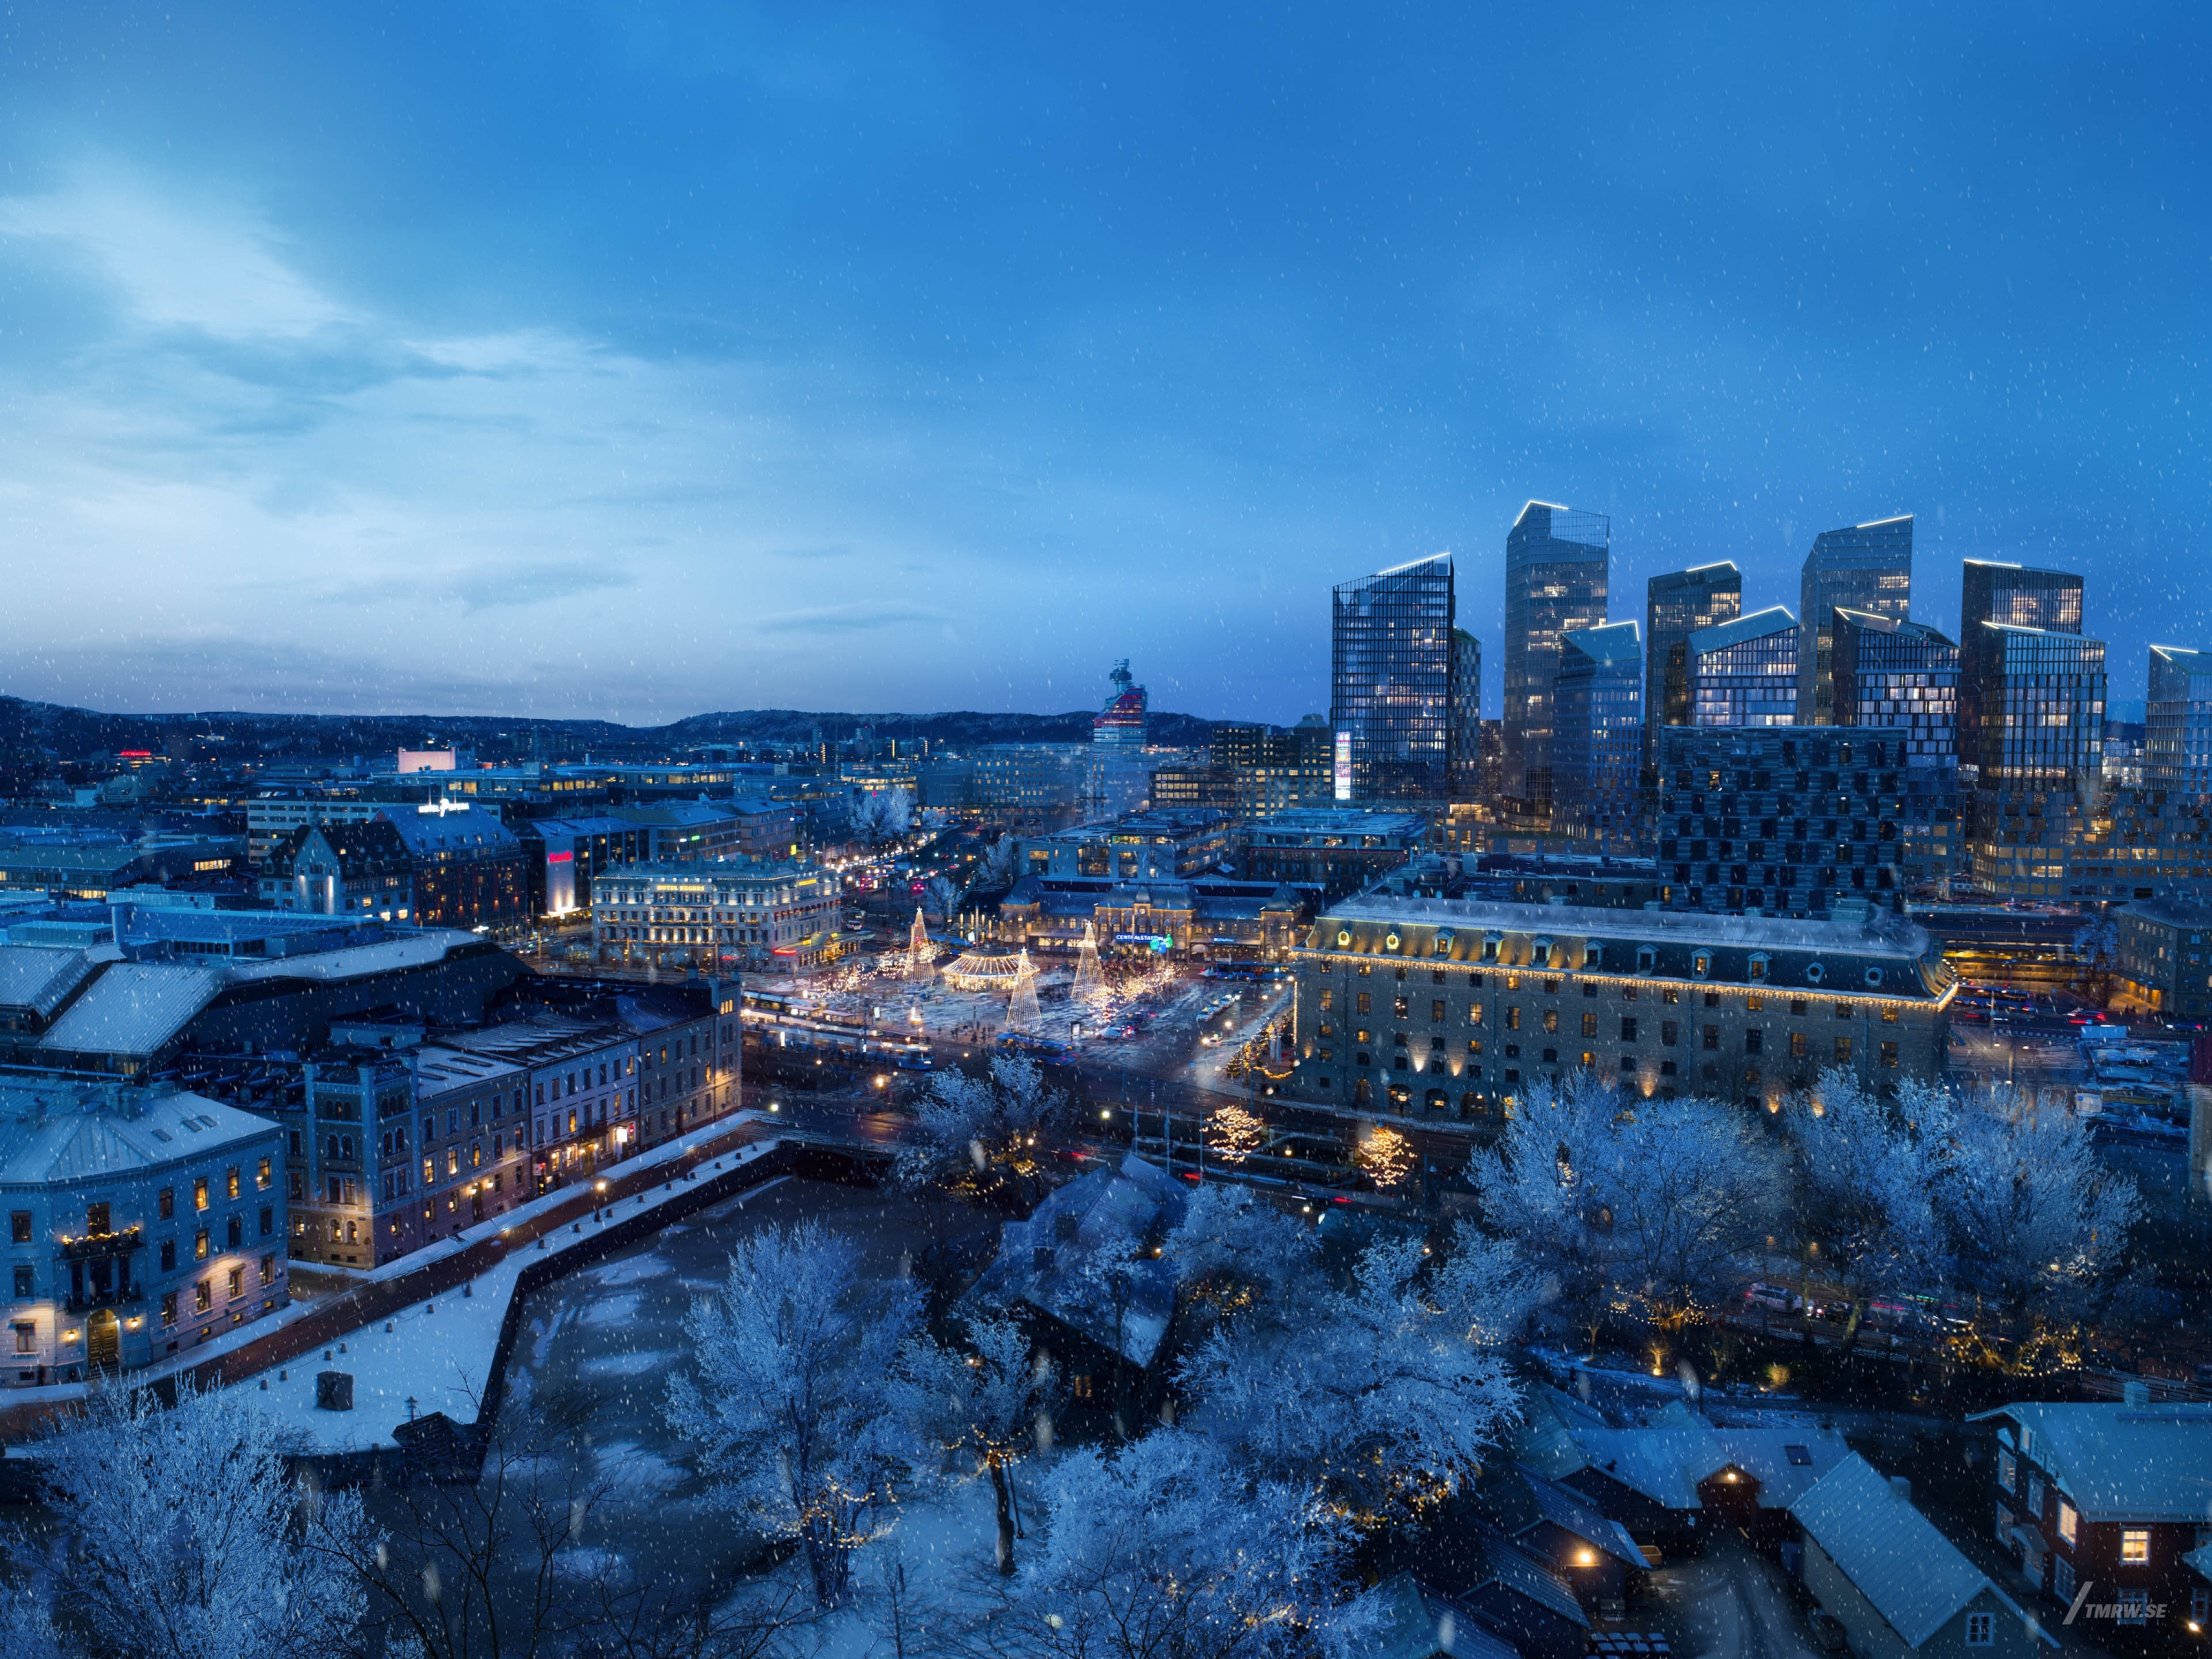 Architectural visualization of Region City for Jernhusen a view from obove in a snowy Gothenburg in evening light form an aerial view.